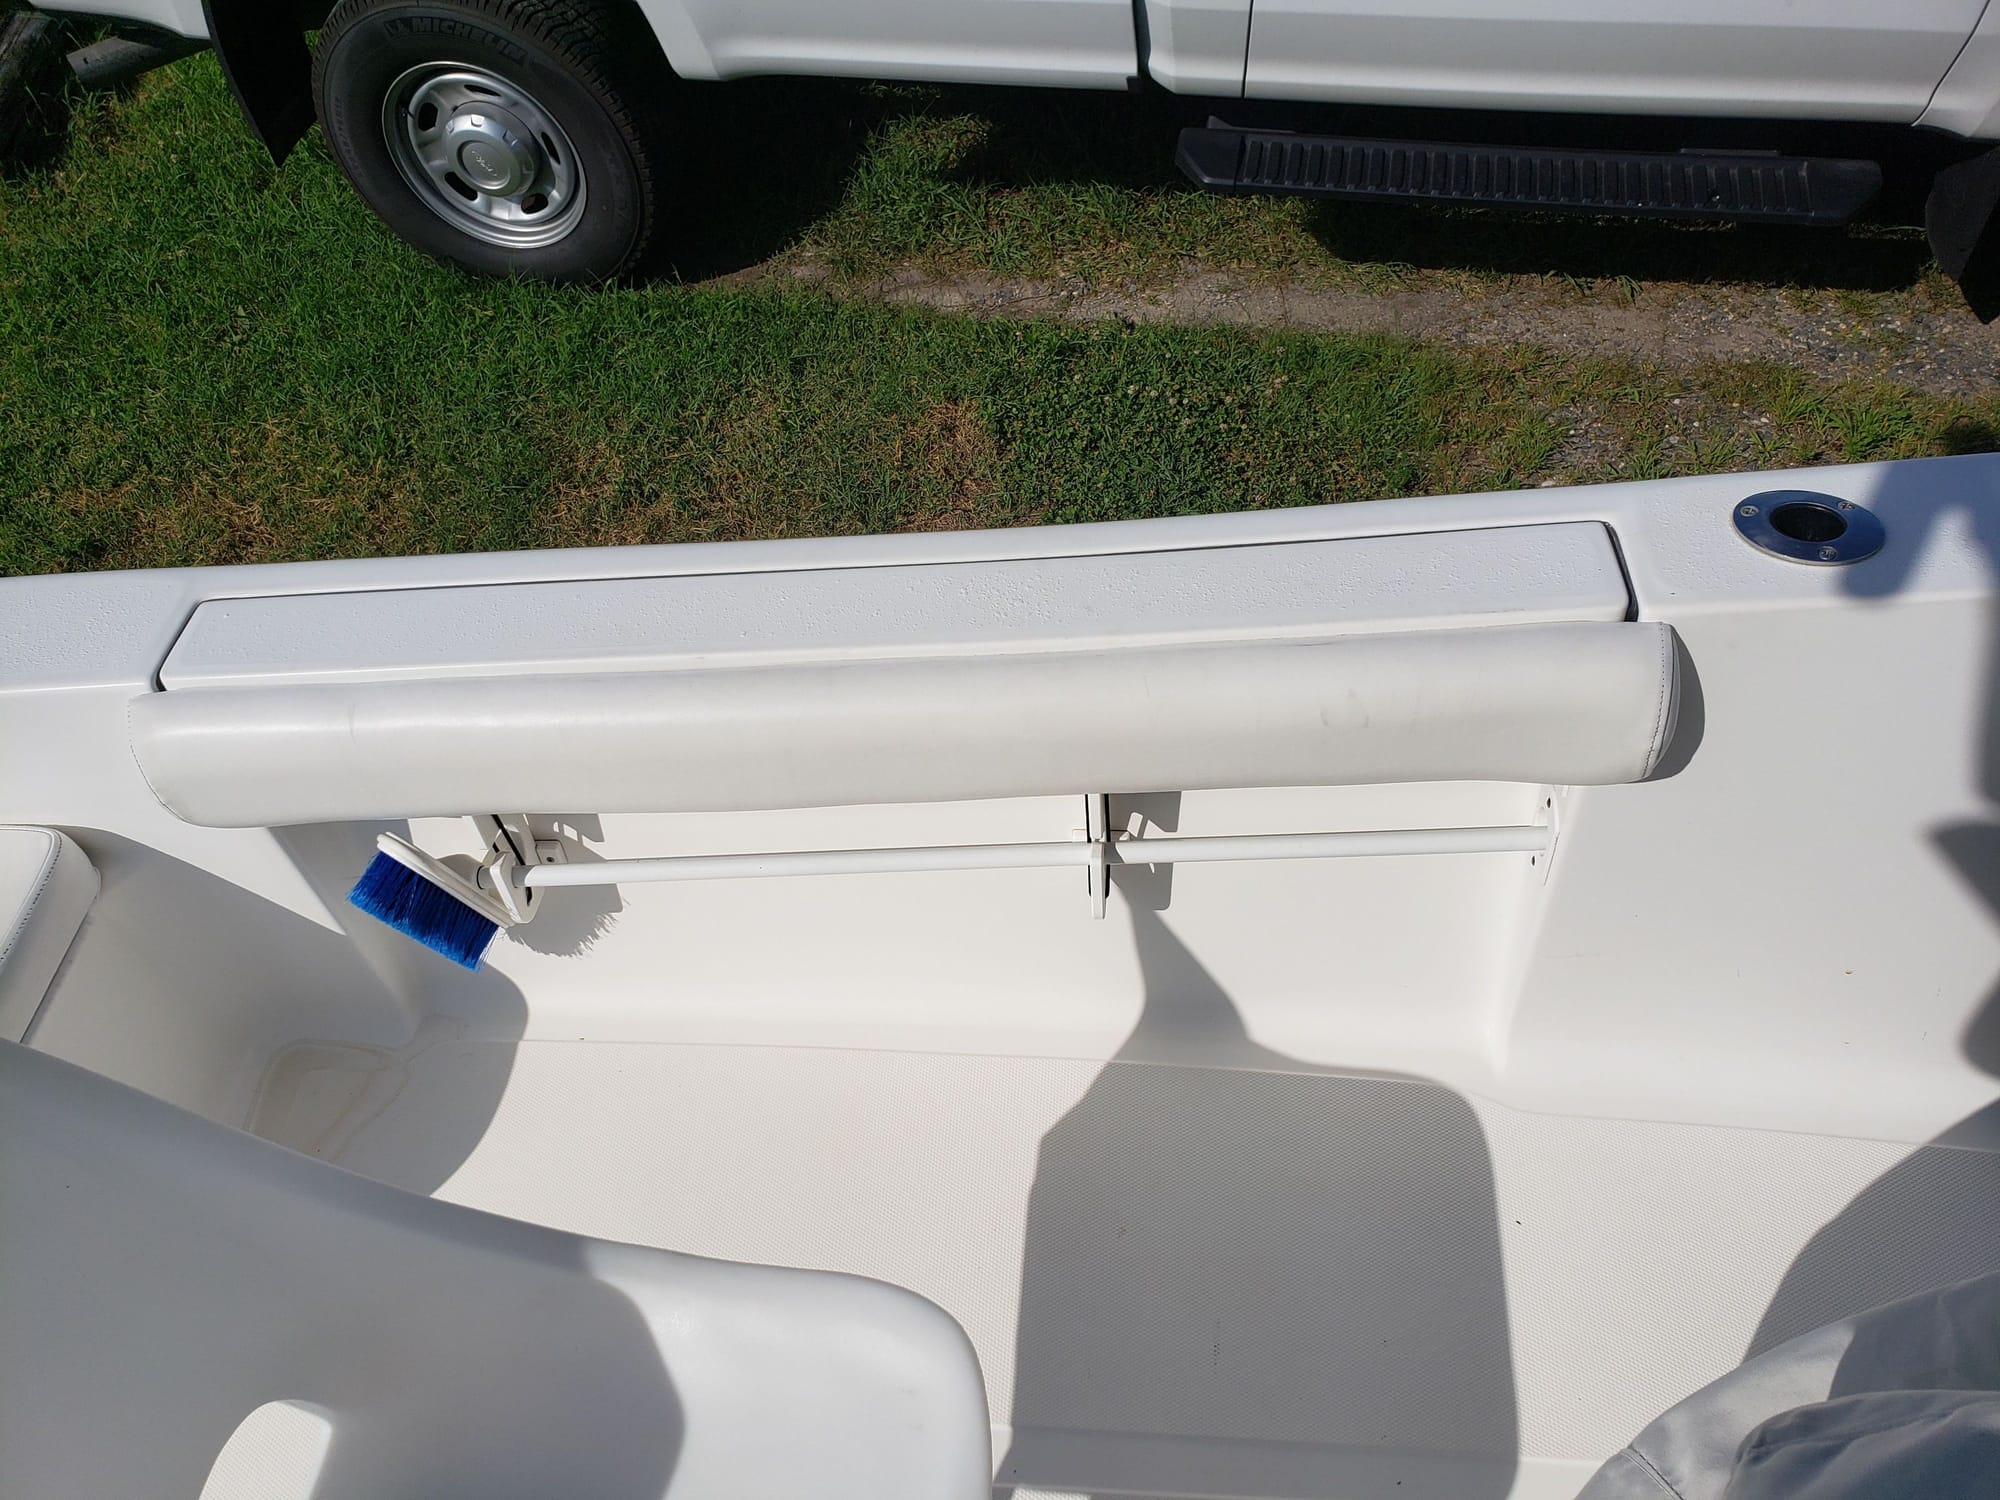 fishing rod holder on front bumper.? - The Hull Truth - Boating and Fishing  Forum